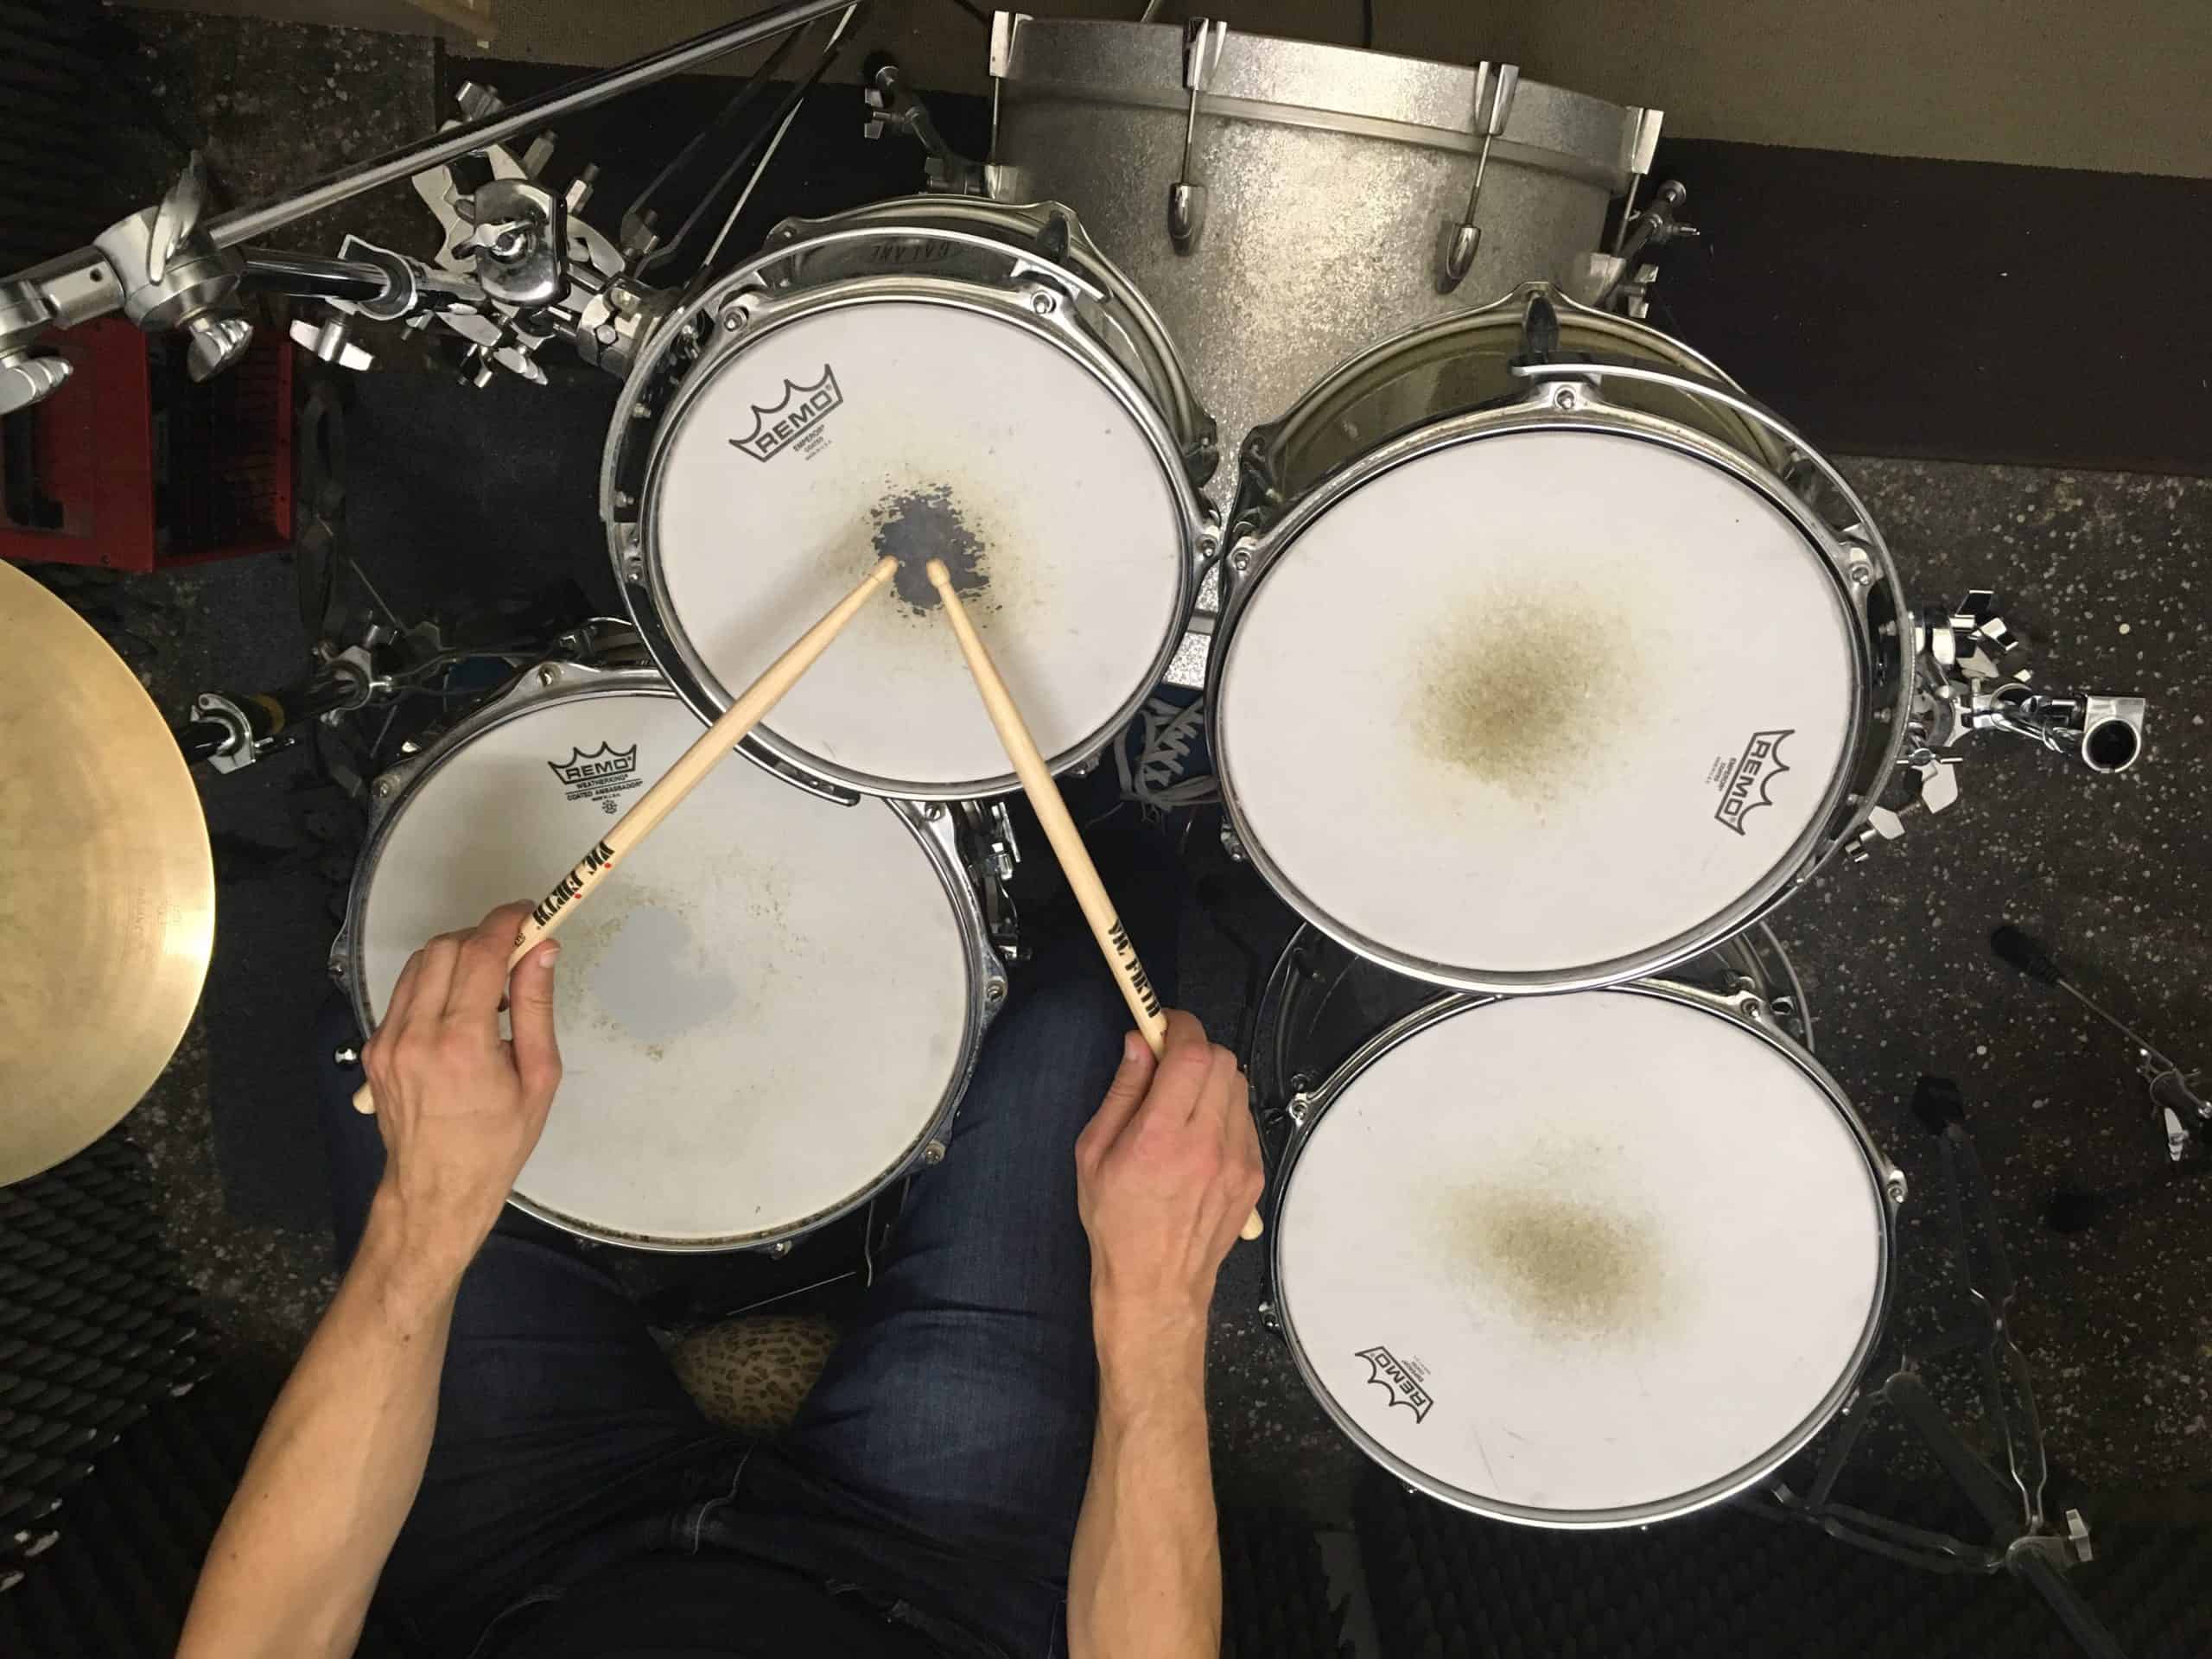 How to set up a drumset: Tom 1